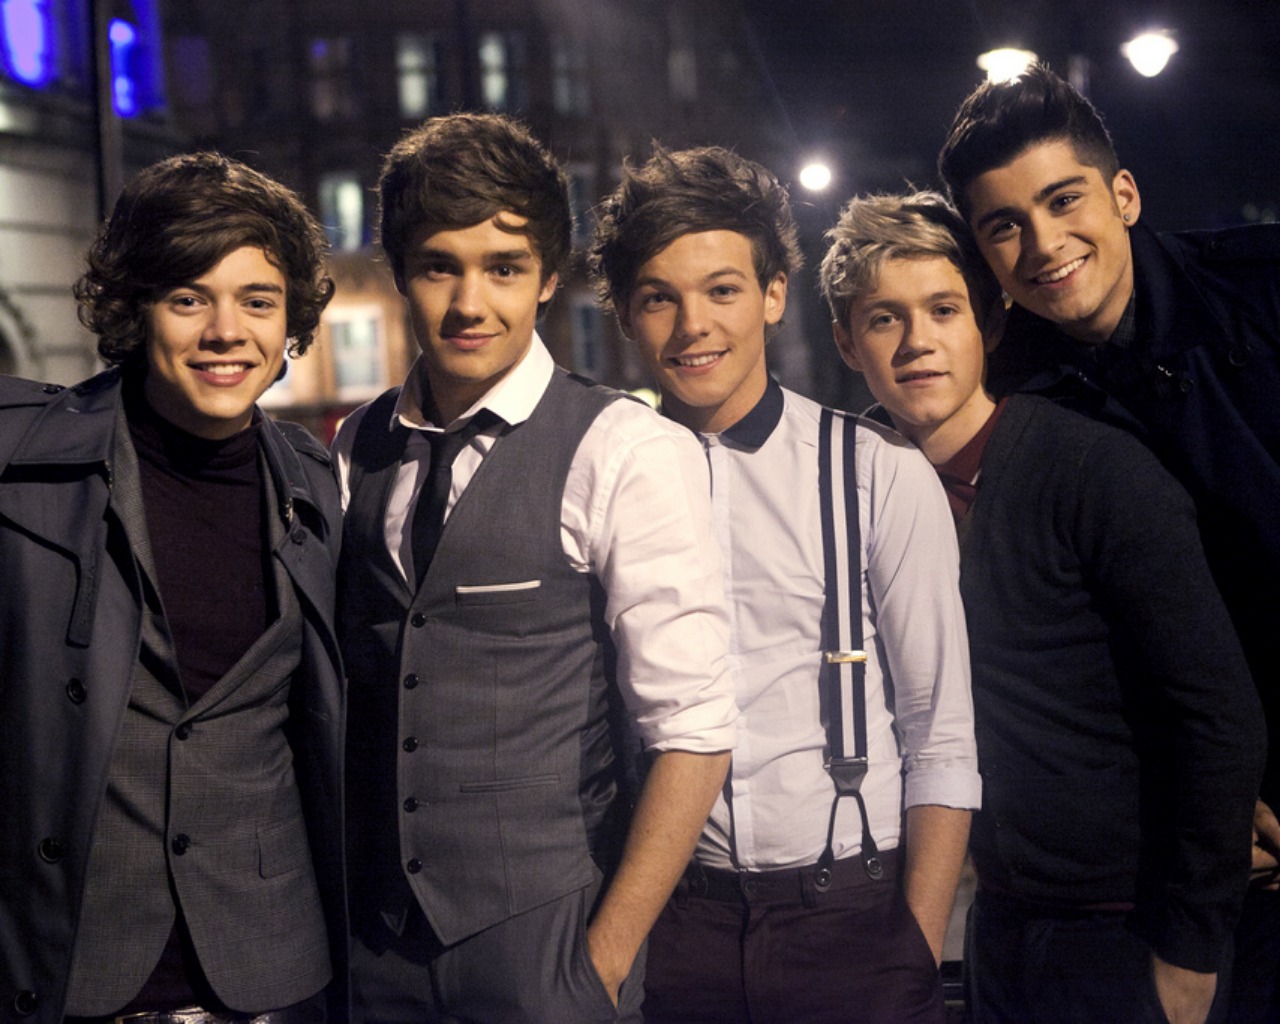 One direction wallpaper in high resolution for free Get One direction